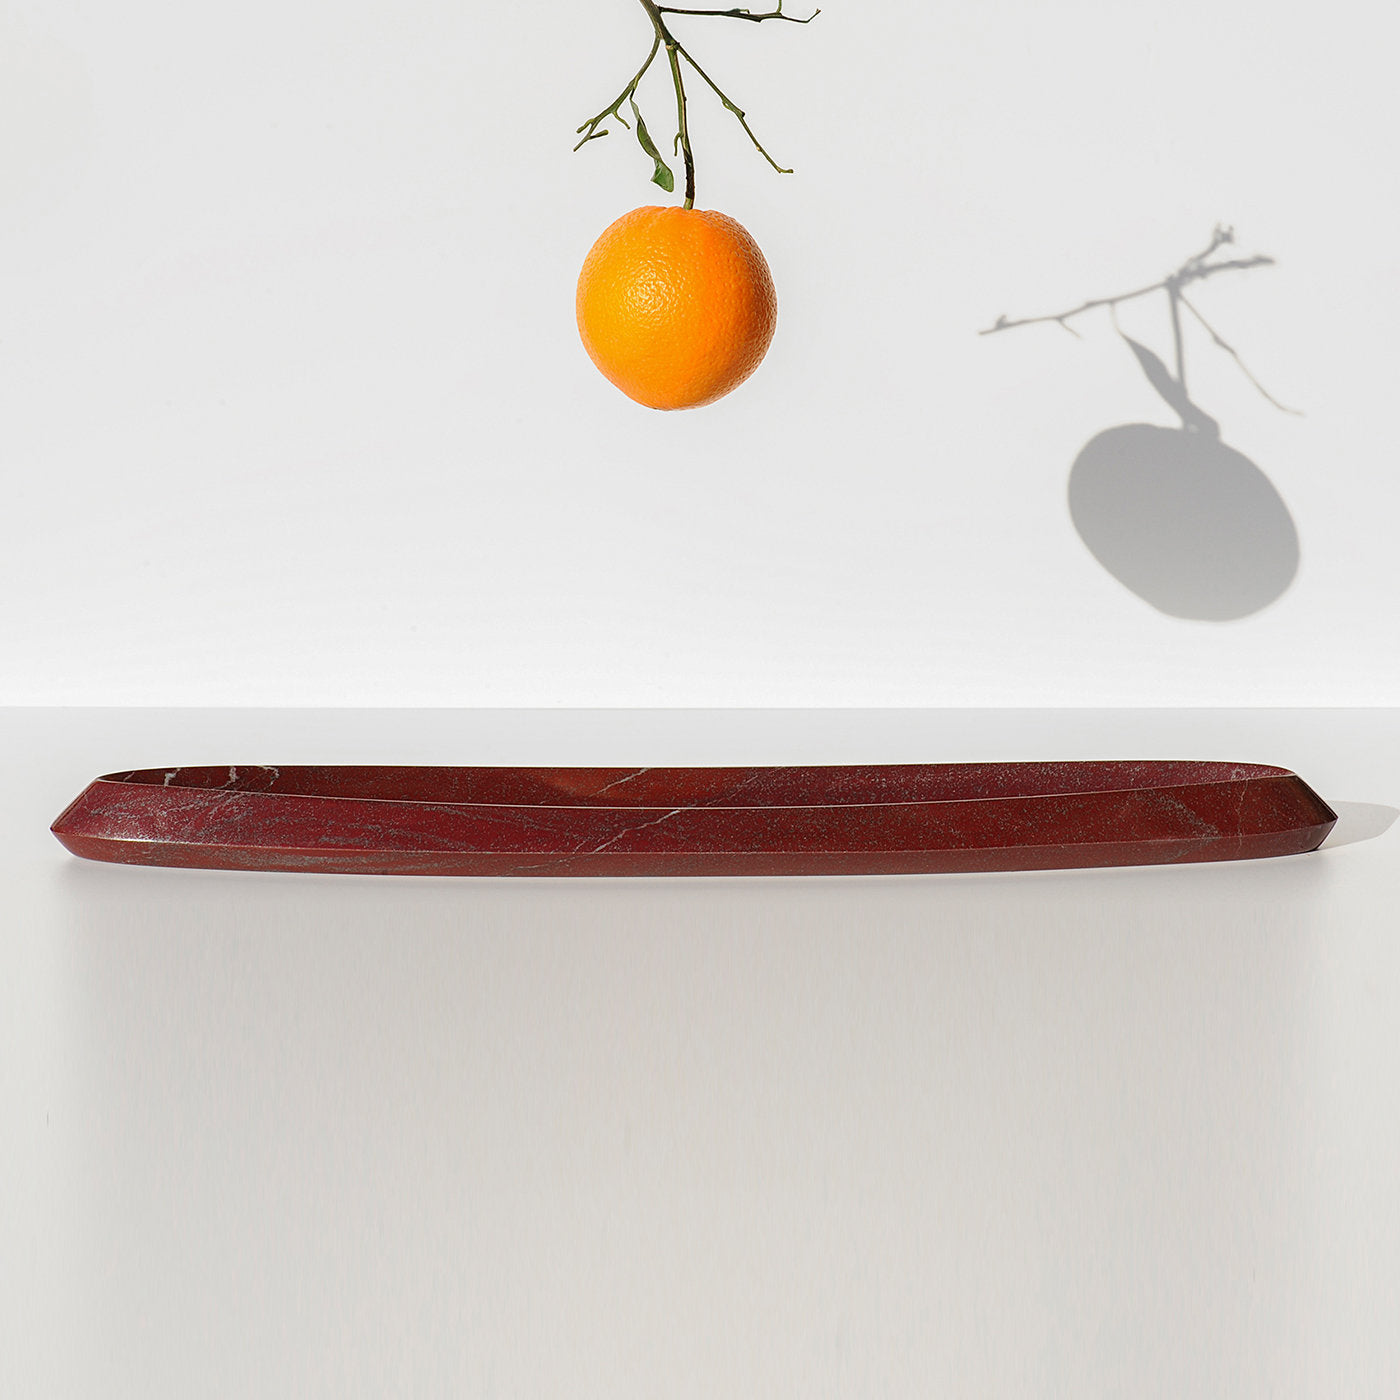 Ipazia Ruby Red Fruit Bowl  - Alternative view 4